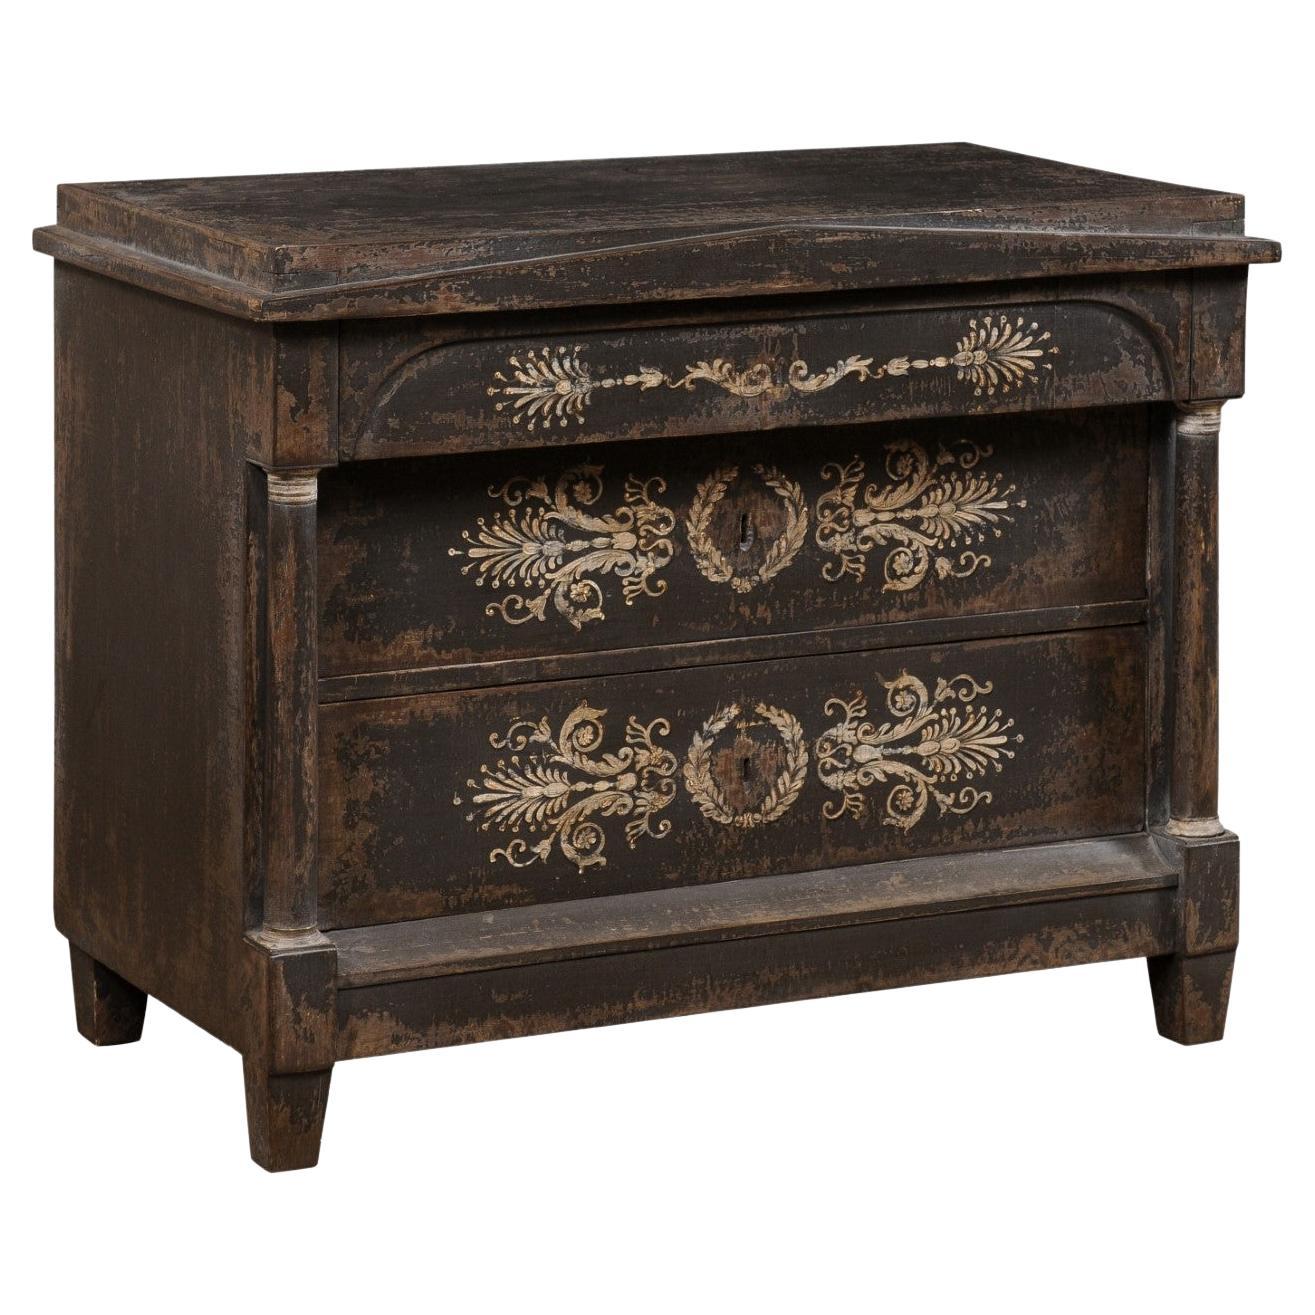 French Empire Artisan-Painted Commode, 19th Century